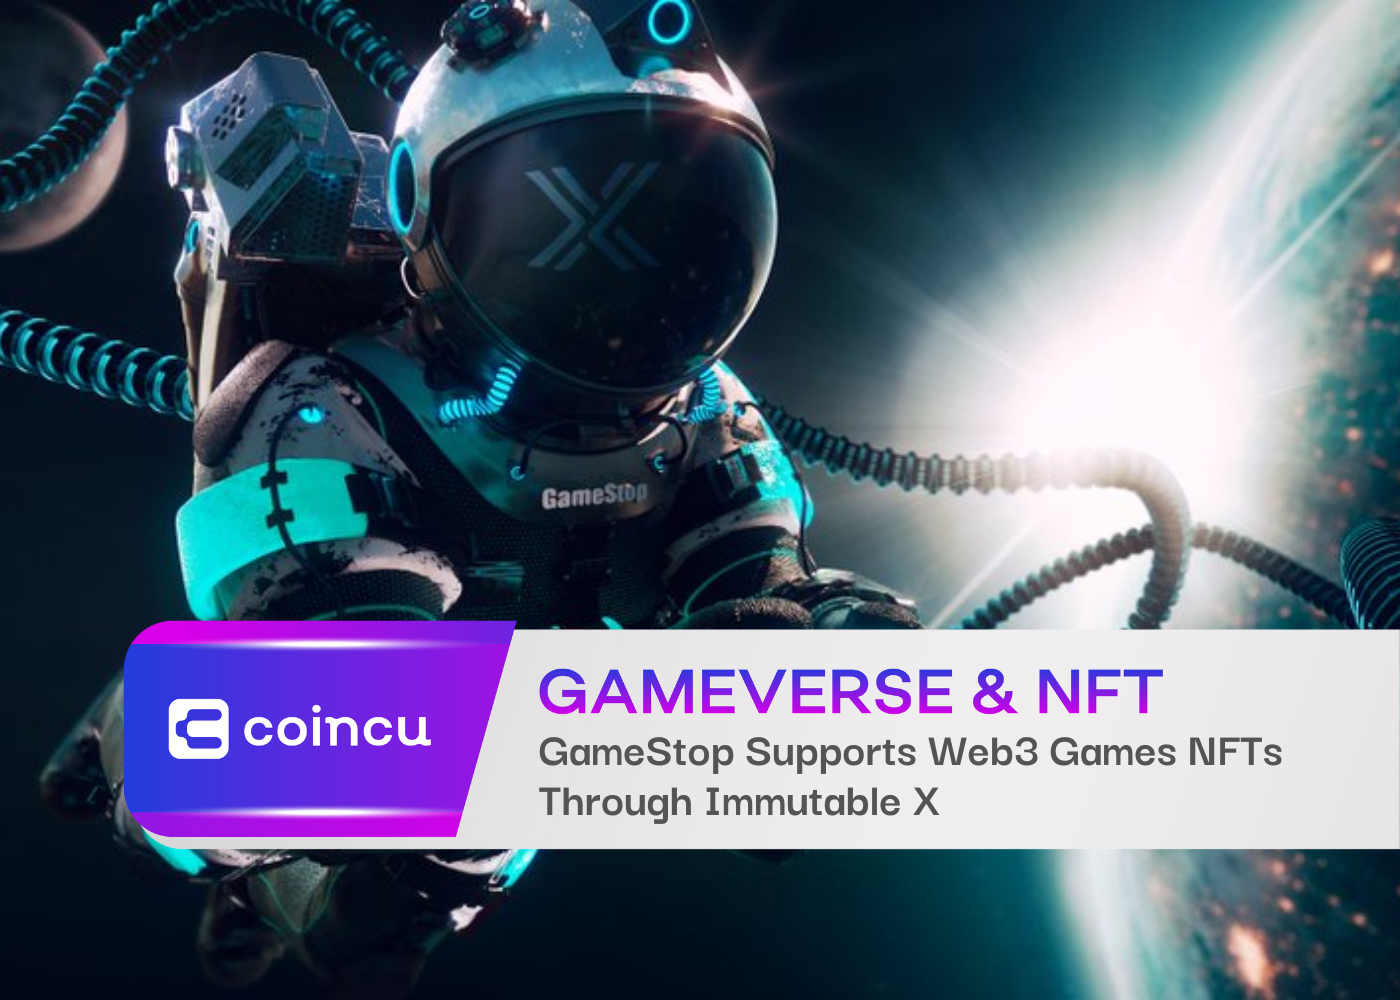 GameStop Supports Web3 Games NFTs Through Immutable X